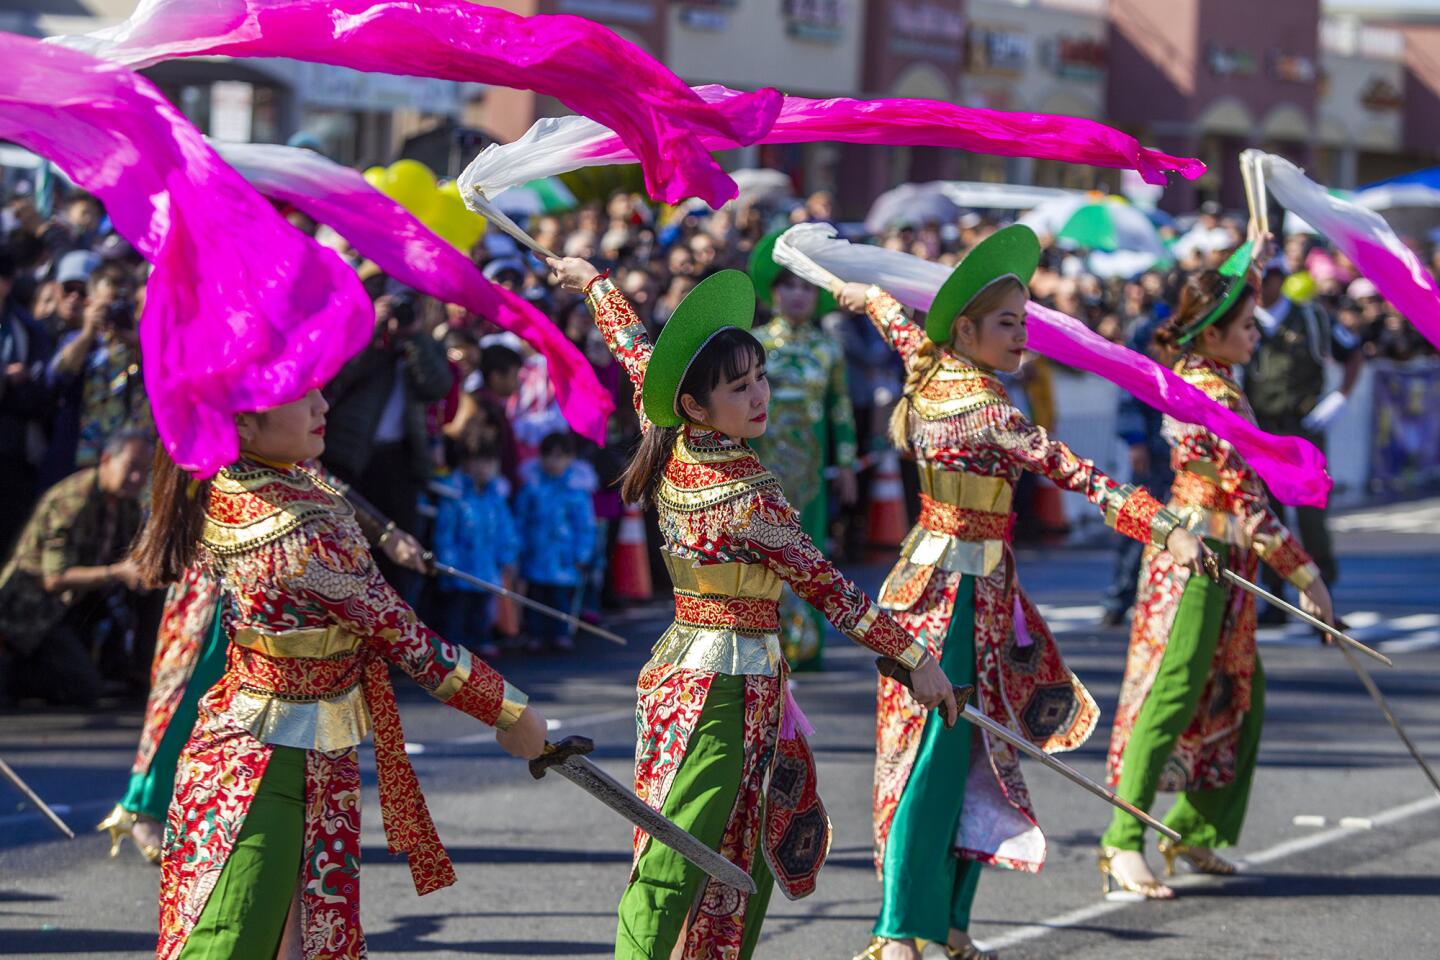 The 20th Annual Little Saigon Tet Parade takes place in Westminster on Feb. 9.